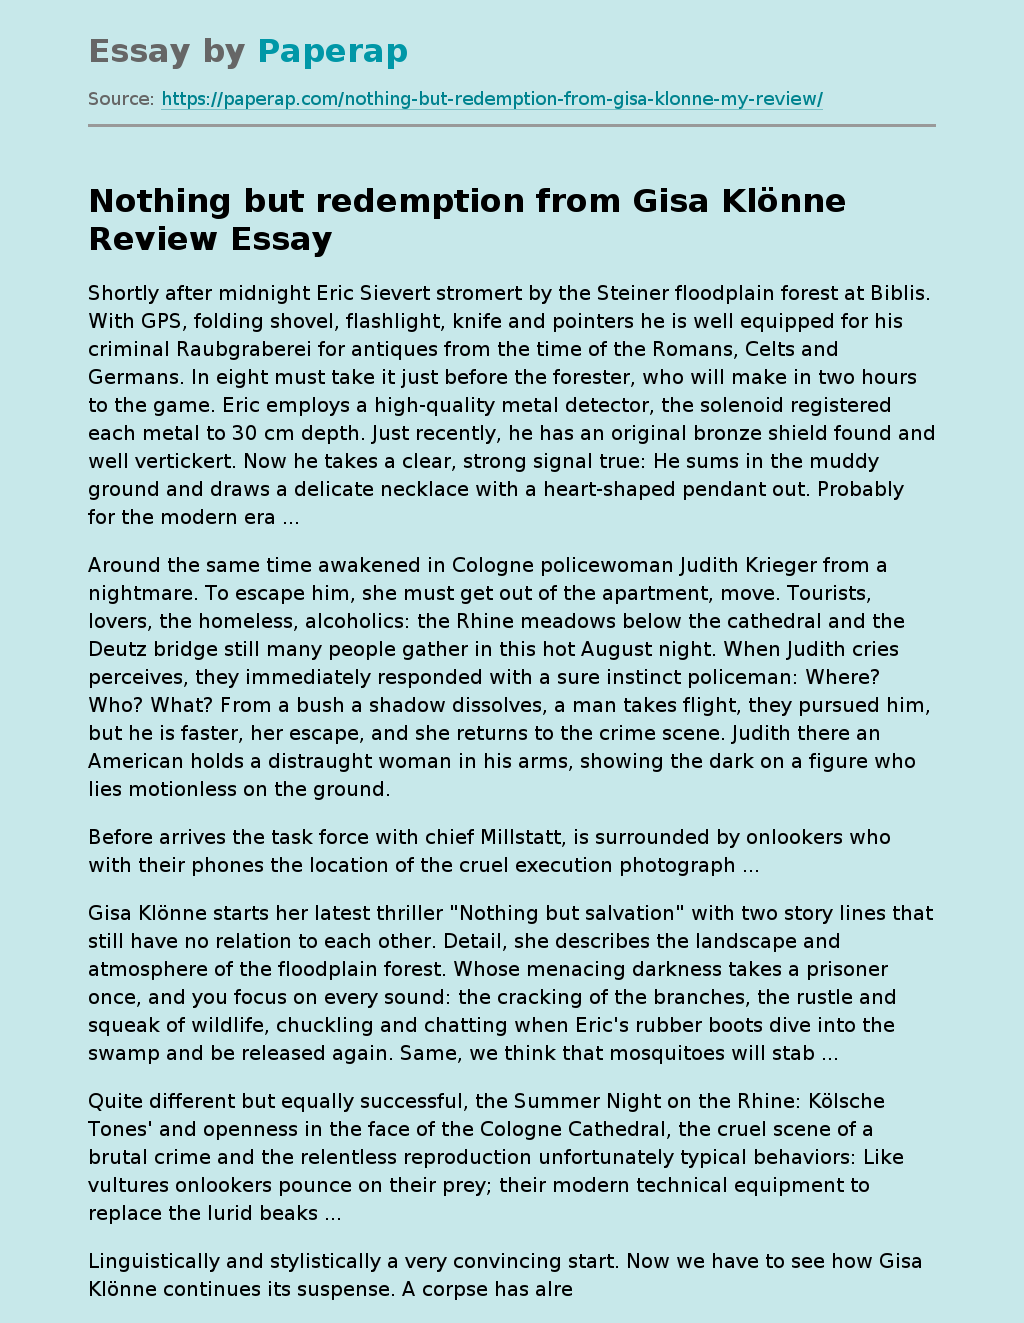 Nothing but redemption from Gisa Klönne Review